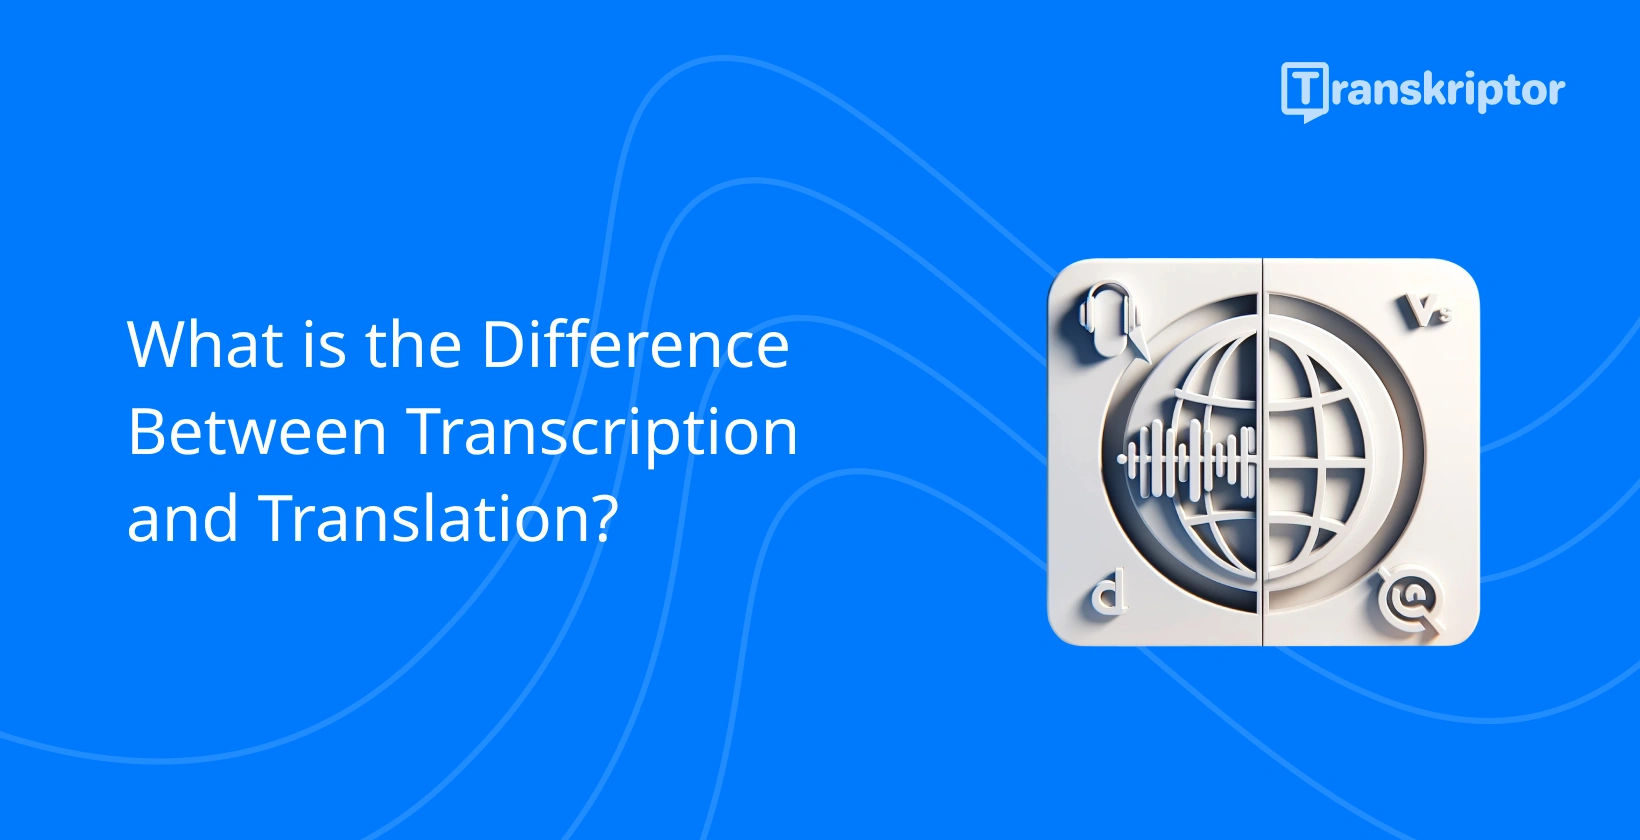 The difference between transcription and translation services with microphone and globe icons.